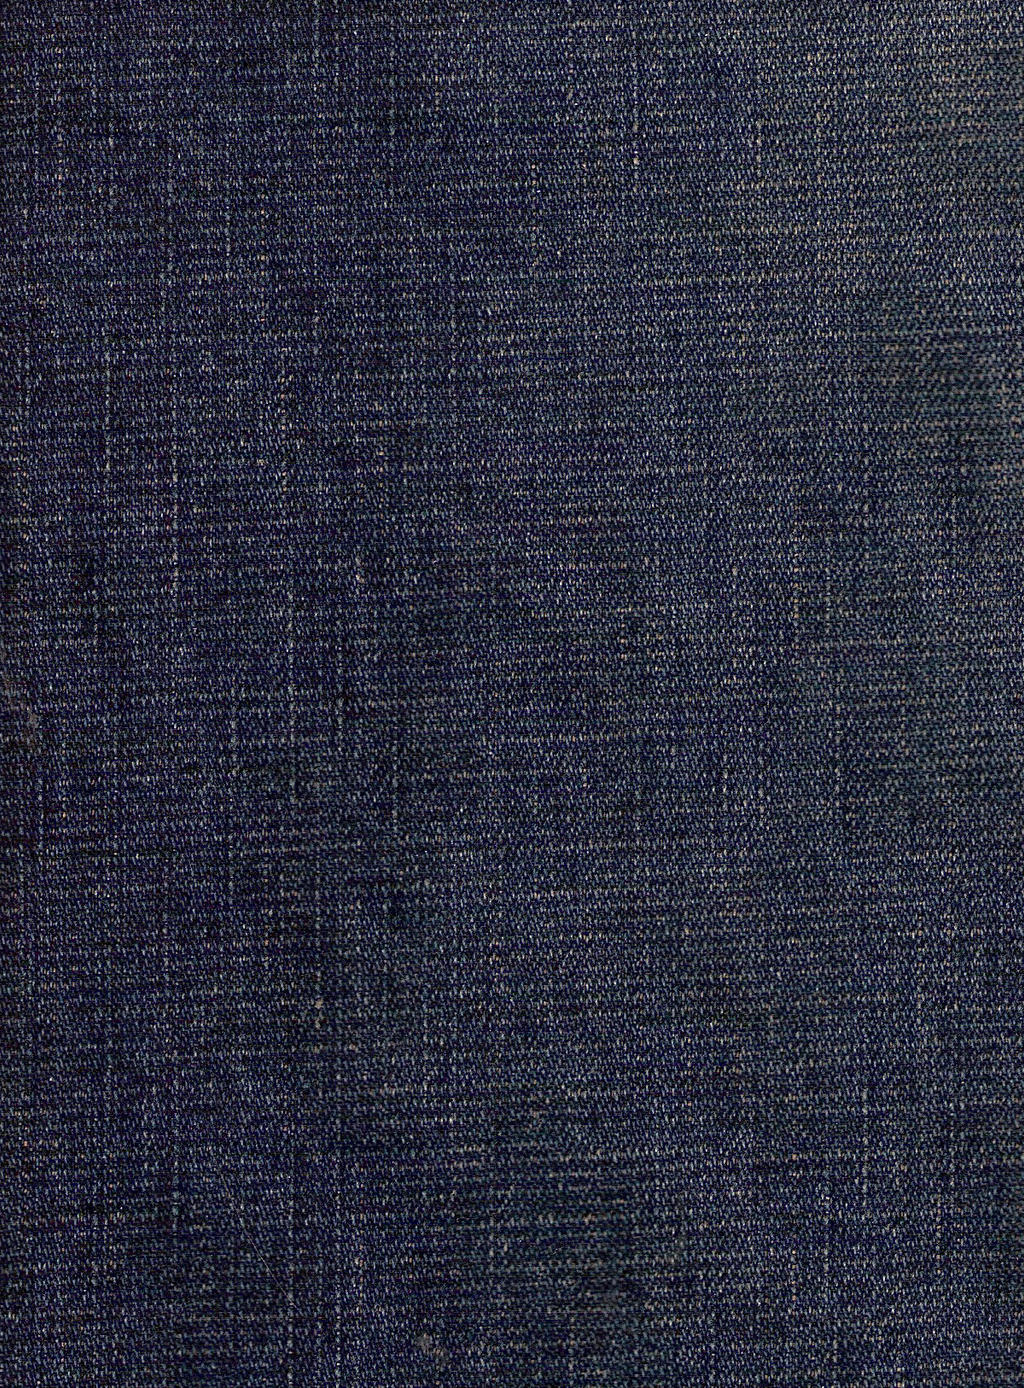 Blue Jean Clothing Texture